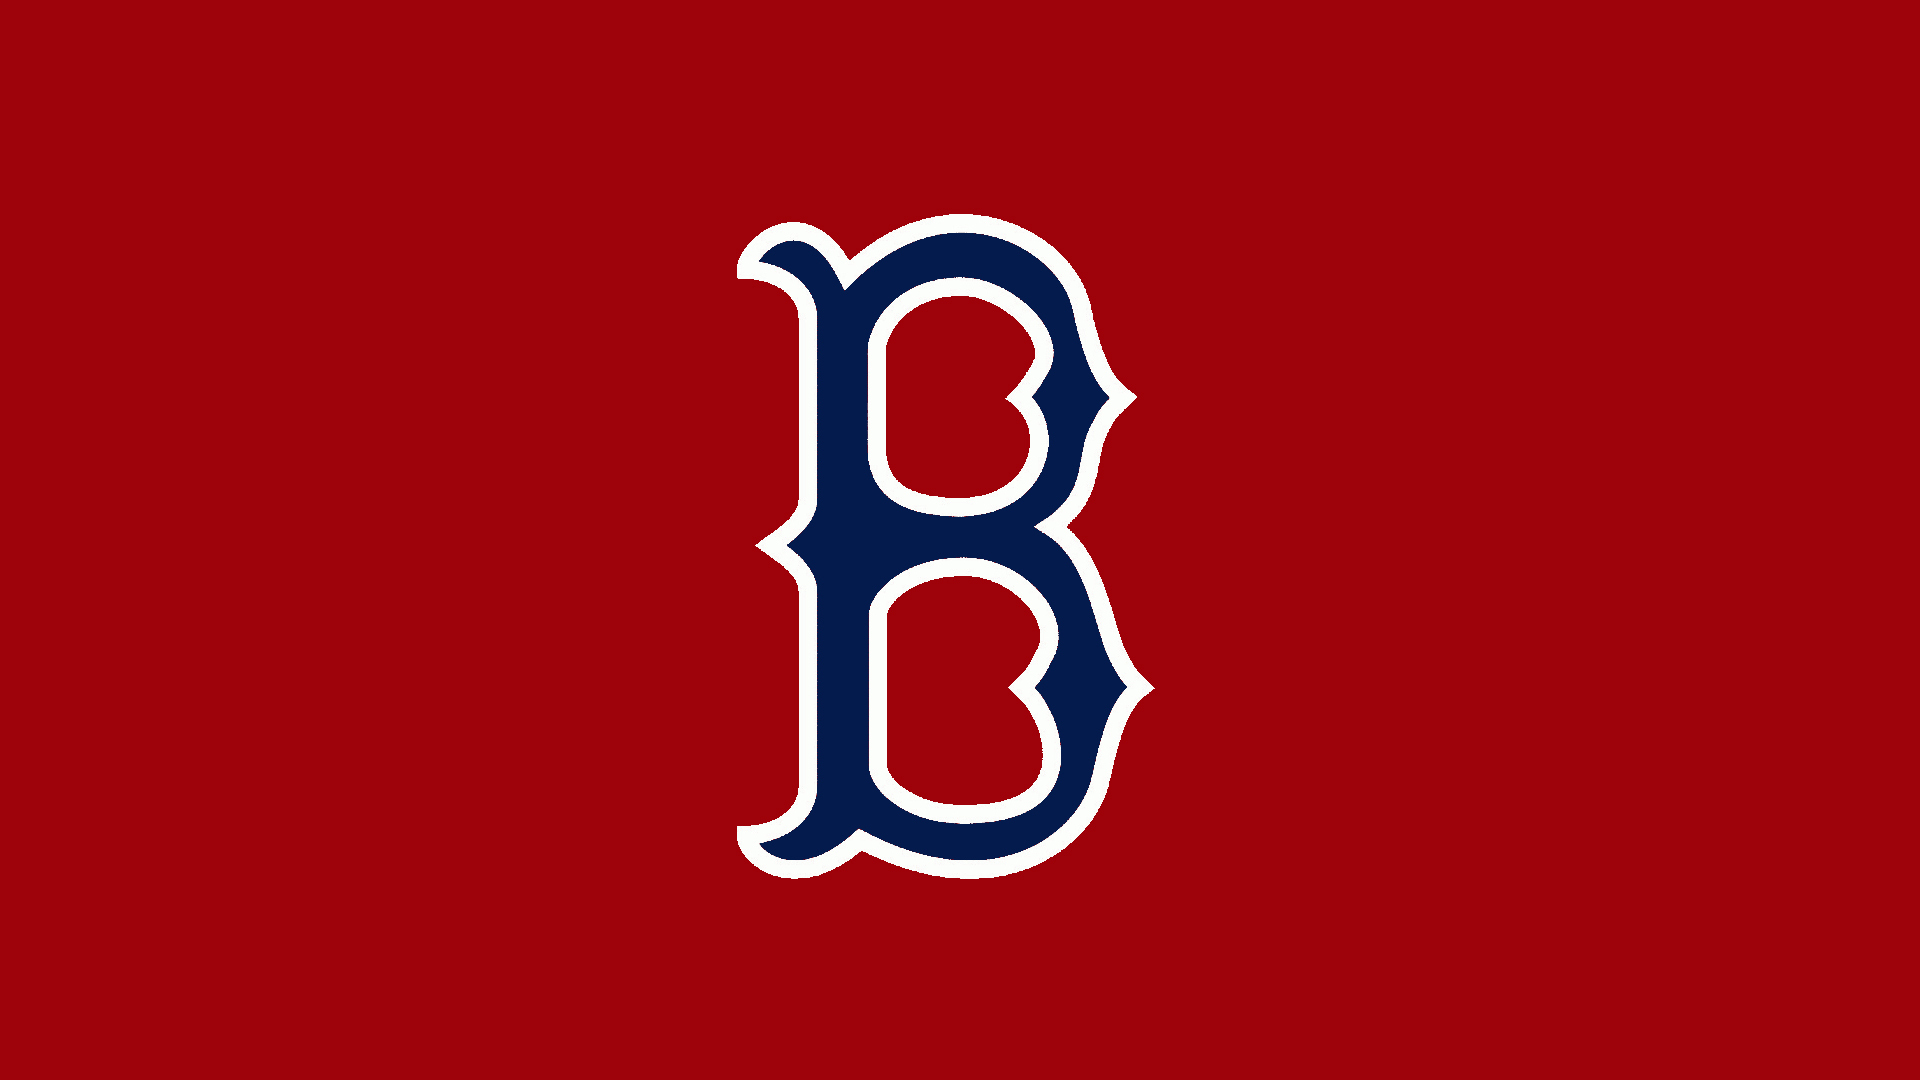 Boston Red Sox HD Wallpaper | Free Download Wallpaper from ...